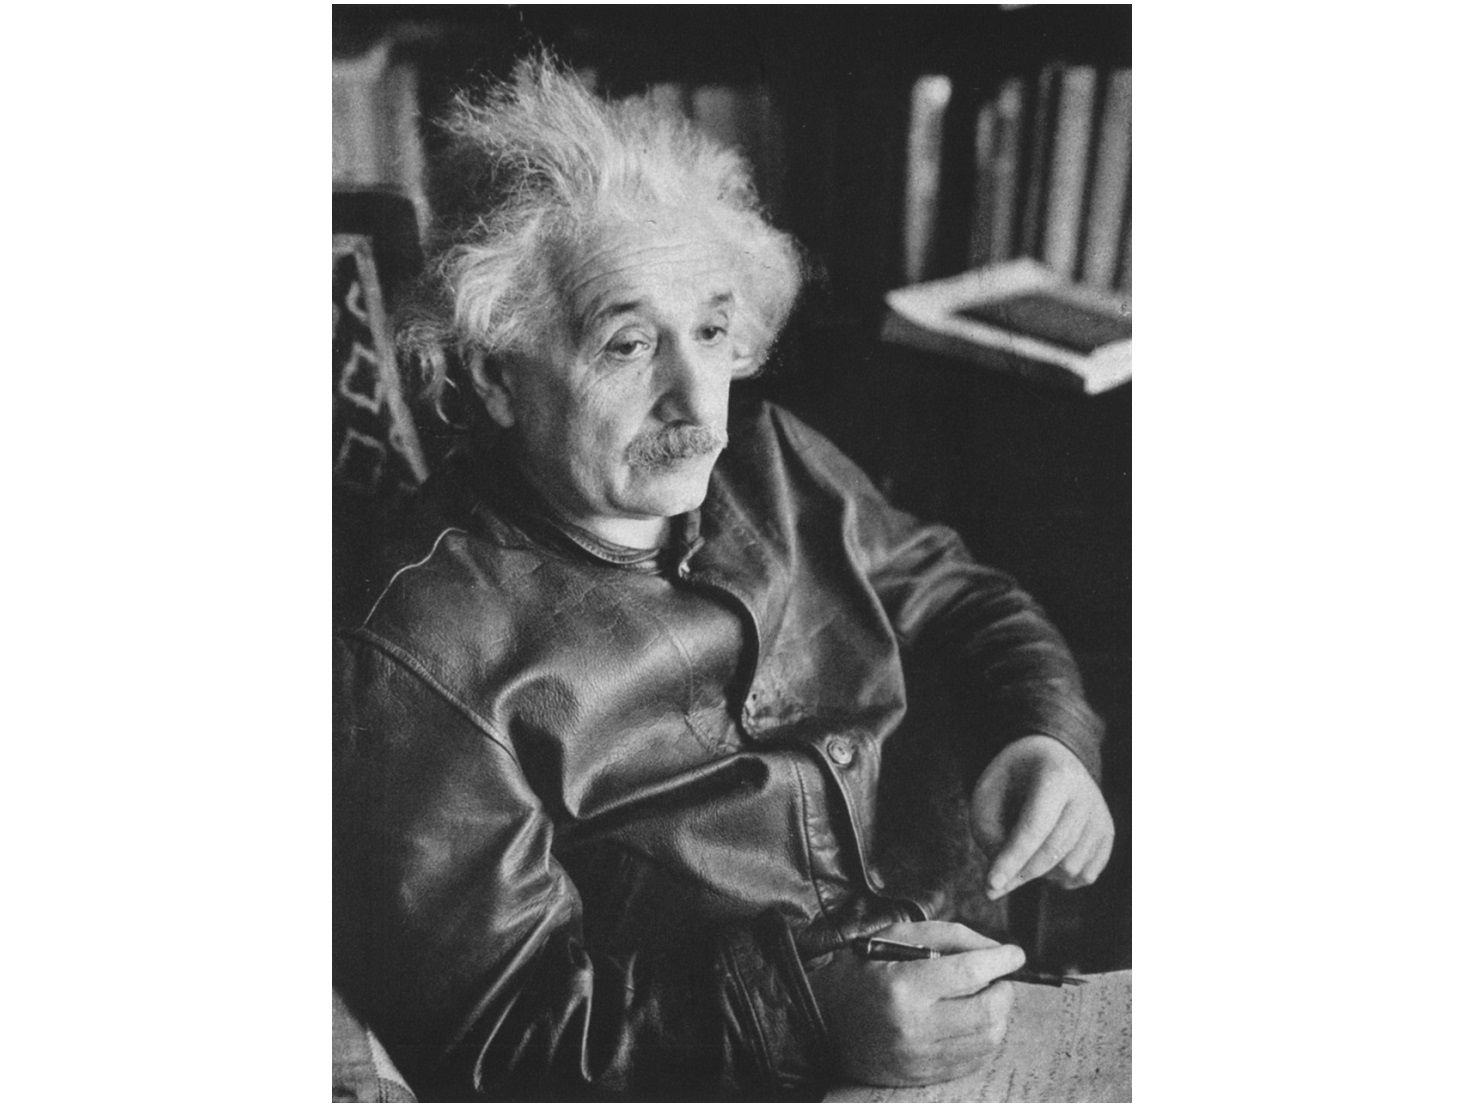 Here's how to have the Levi's jacket by Albert Einstein